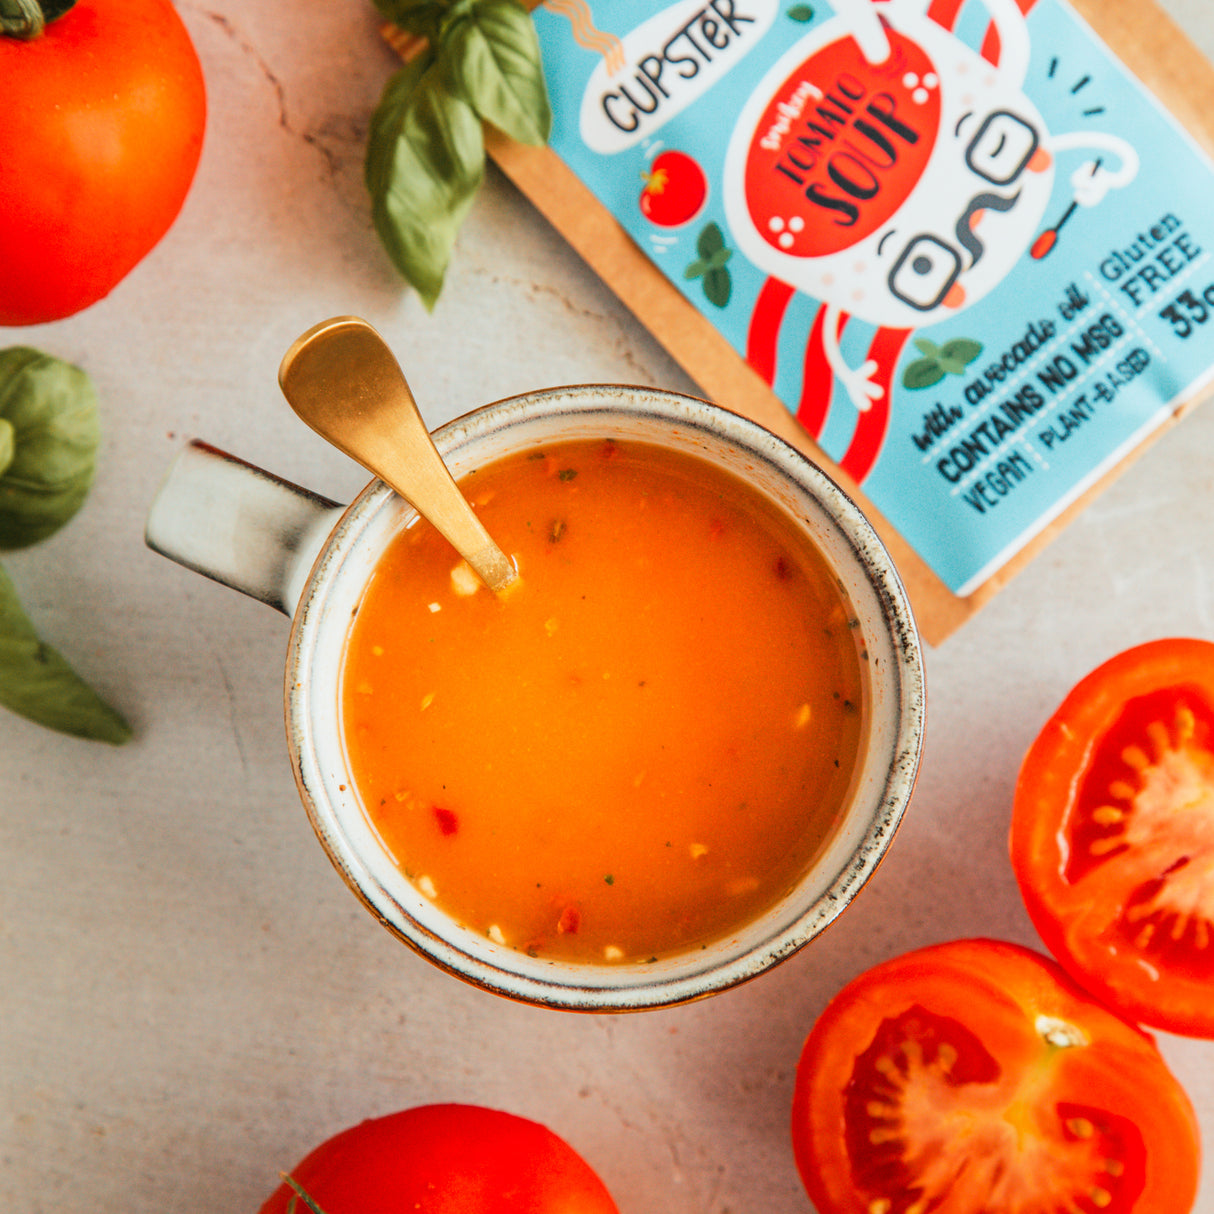 Cupster instant smokey tomato soup 33g